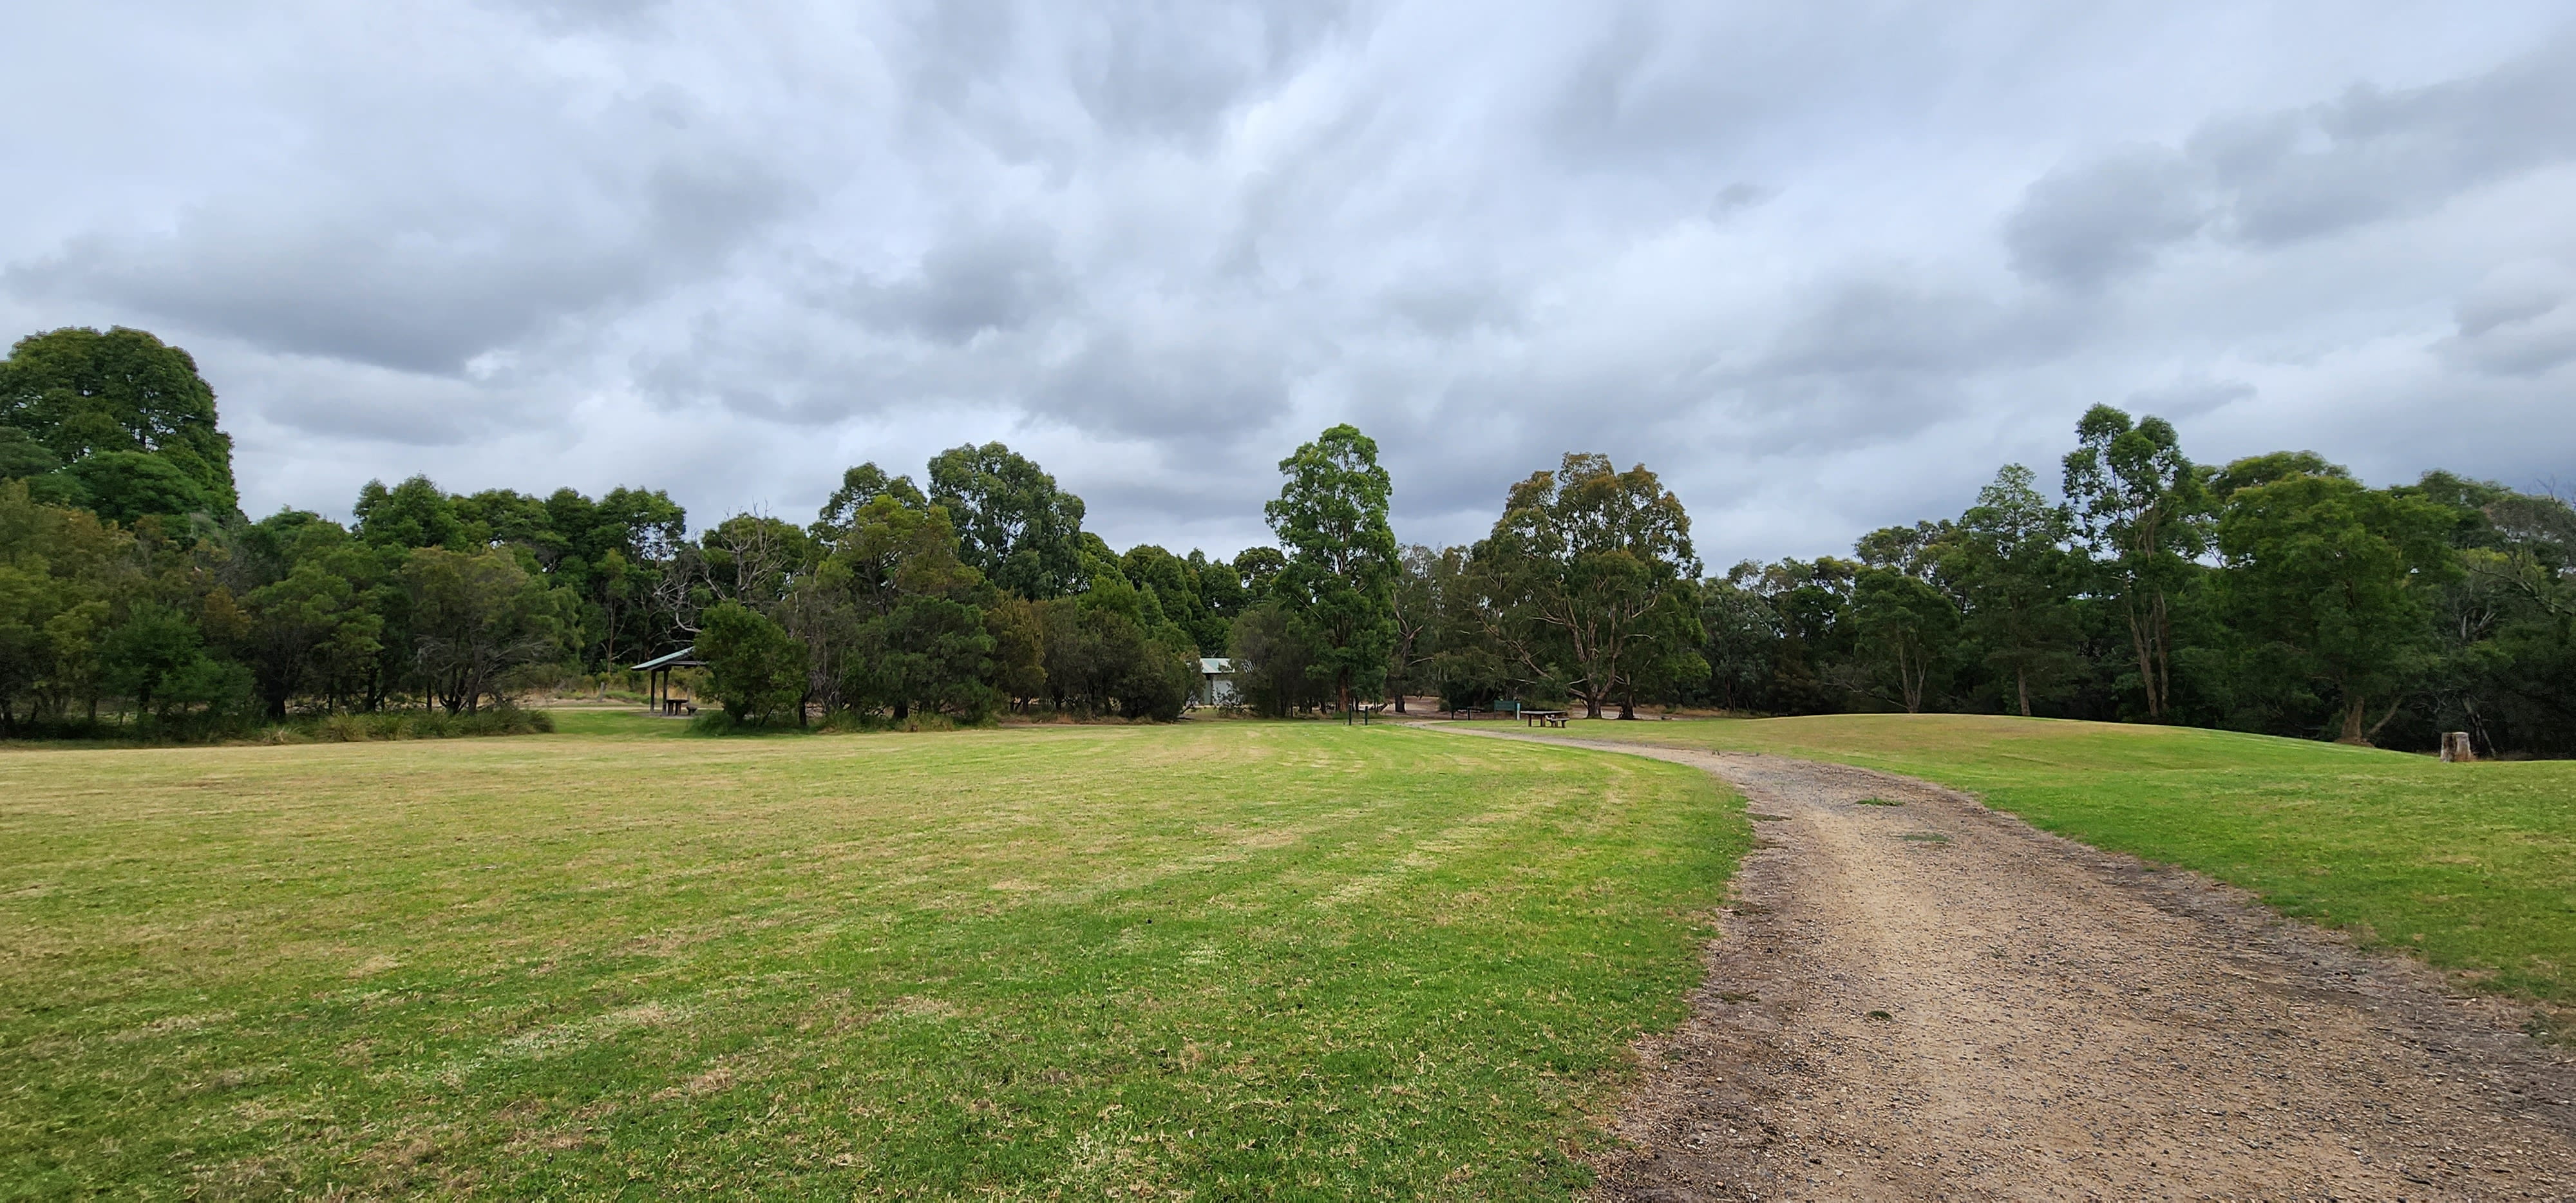 Image shows a gravel path winding in between two large grass fields. There are gums and green trees and a grey sky in the background.